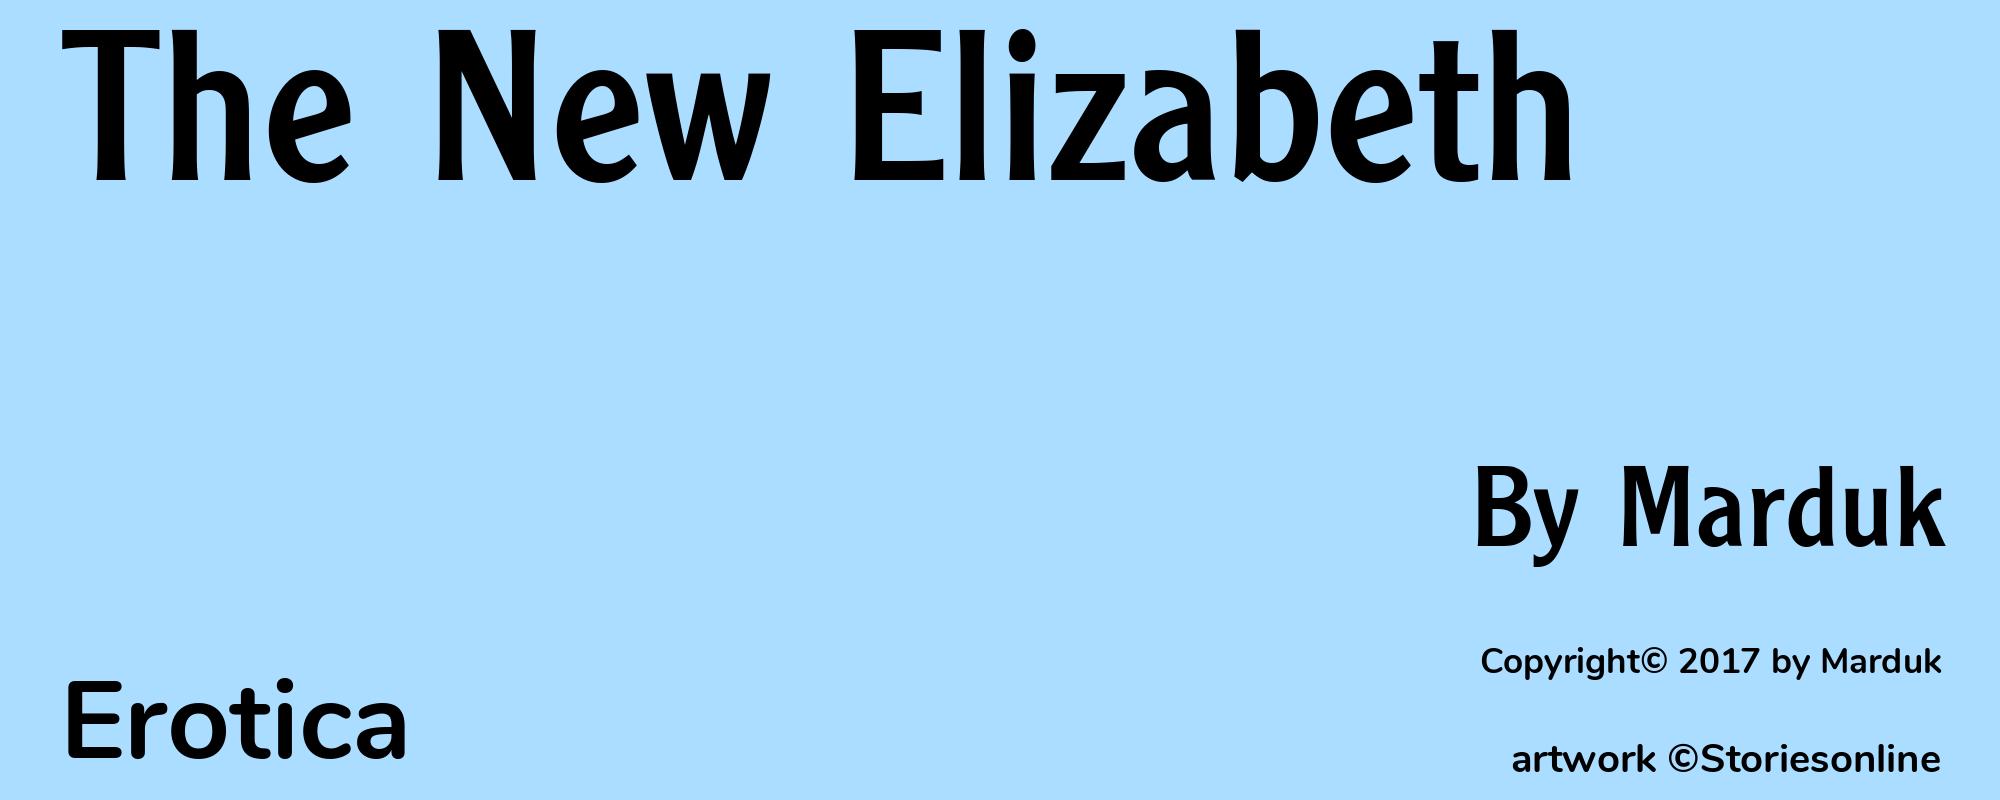 The New Elizabeth - Cover